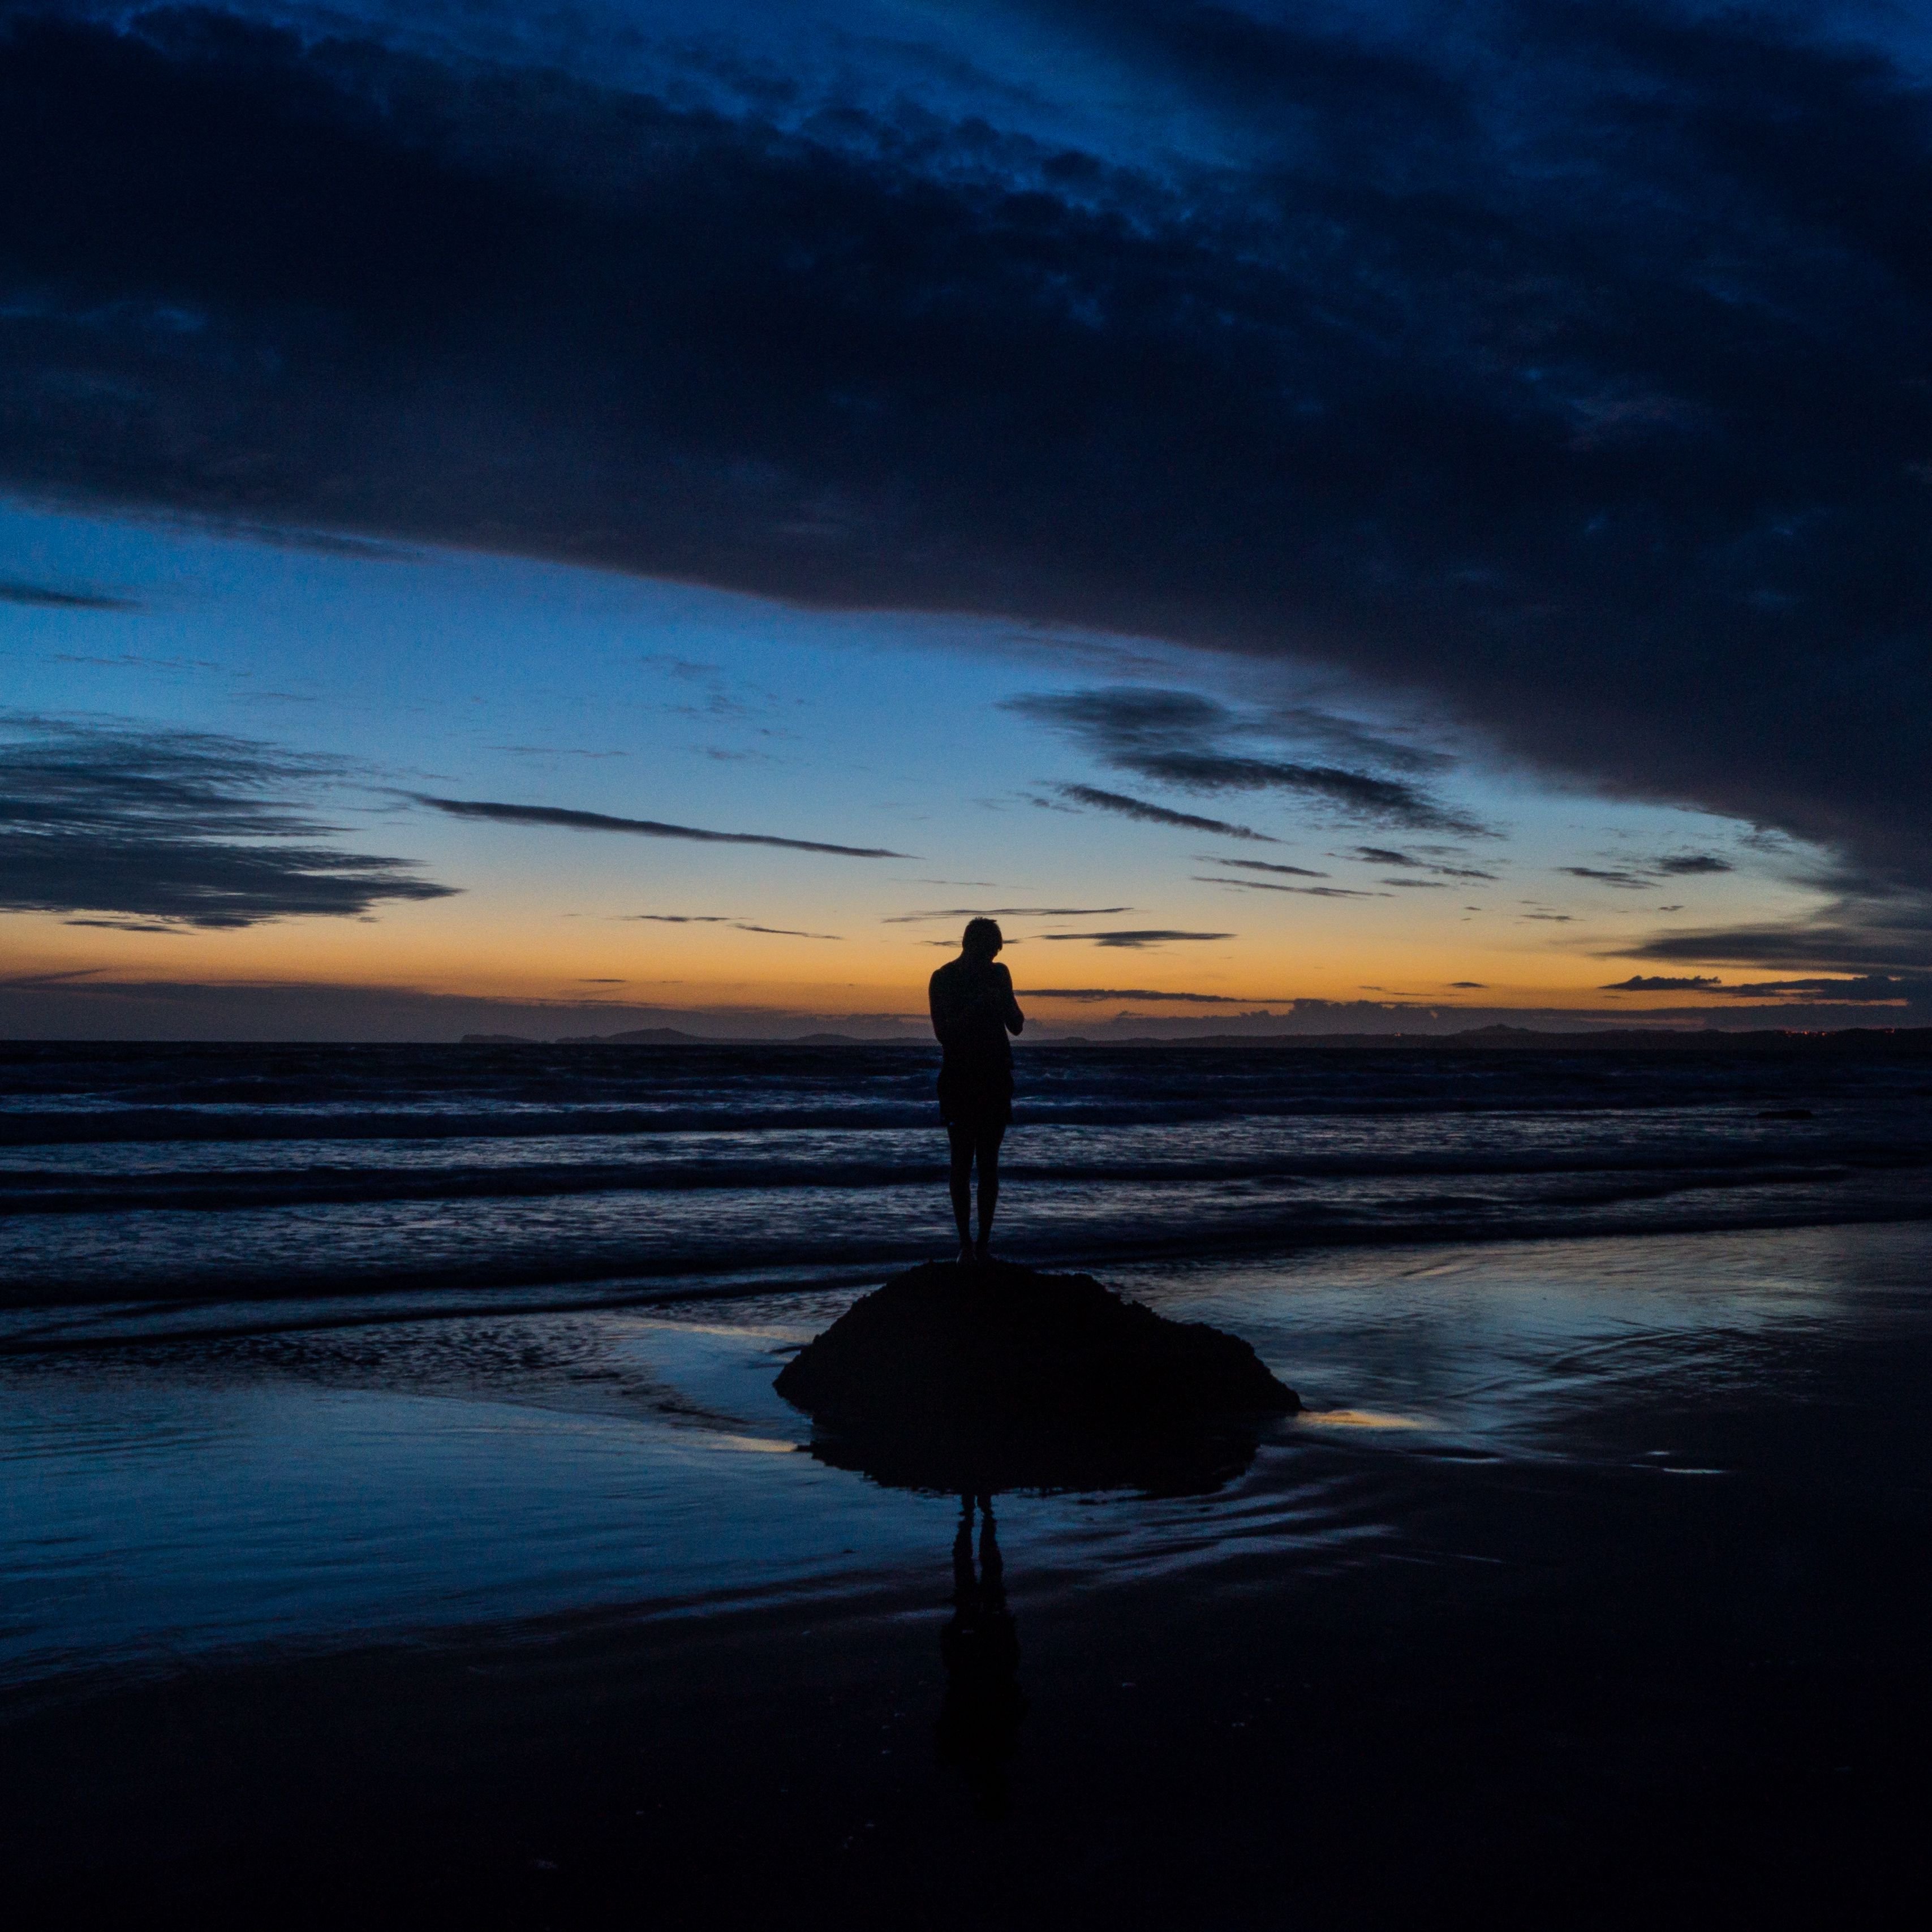 Download wallpaper 3415x3415 silhouette, lonely, loneliness, sunset ...